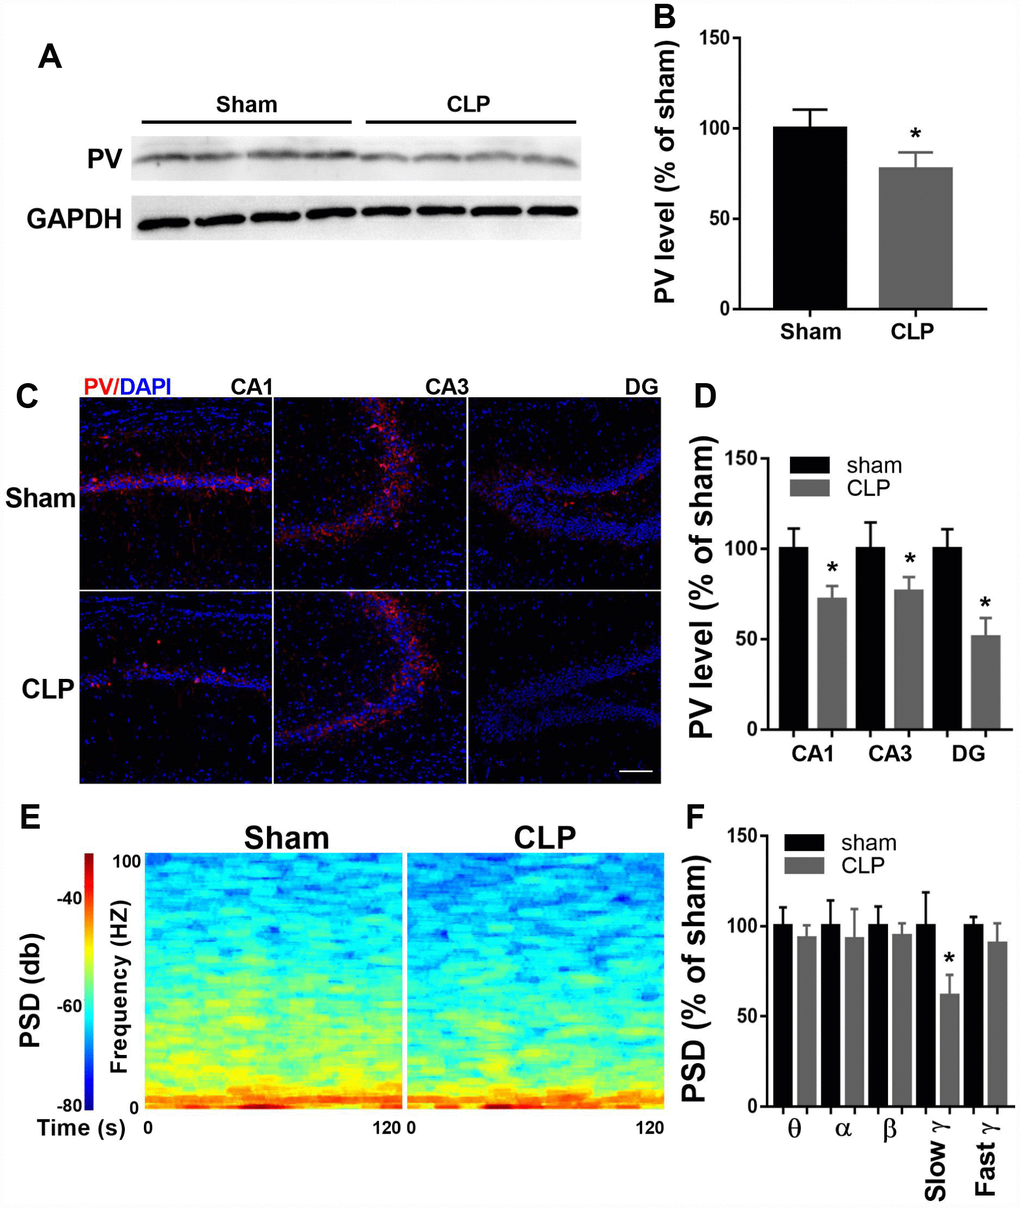 Altered hippocampal PV expression and LFP after CLP. (A–B) PV expression decreased significantly at 14 days after CLP compared with sham group (n = 4). (C–D) Decreased PV expression was observed in all subregions of the hippocampus 14 days after CLP (n = 4). (E–F) Slow γ oscillation band was significantly decreased in CLP group when compared with sham group, but there was no difference in θ, α, β, or fast γ band power between these two groups (n = 3). Data are shown as mean ± SD, *P 